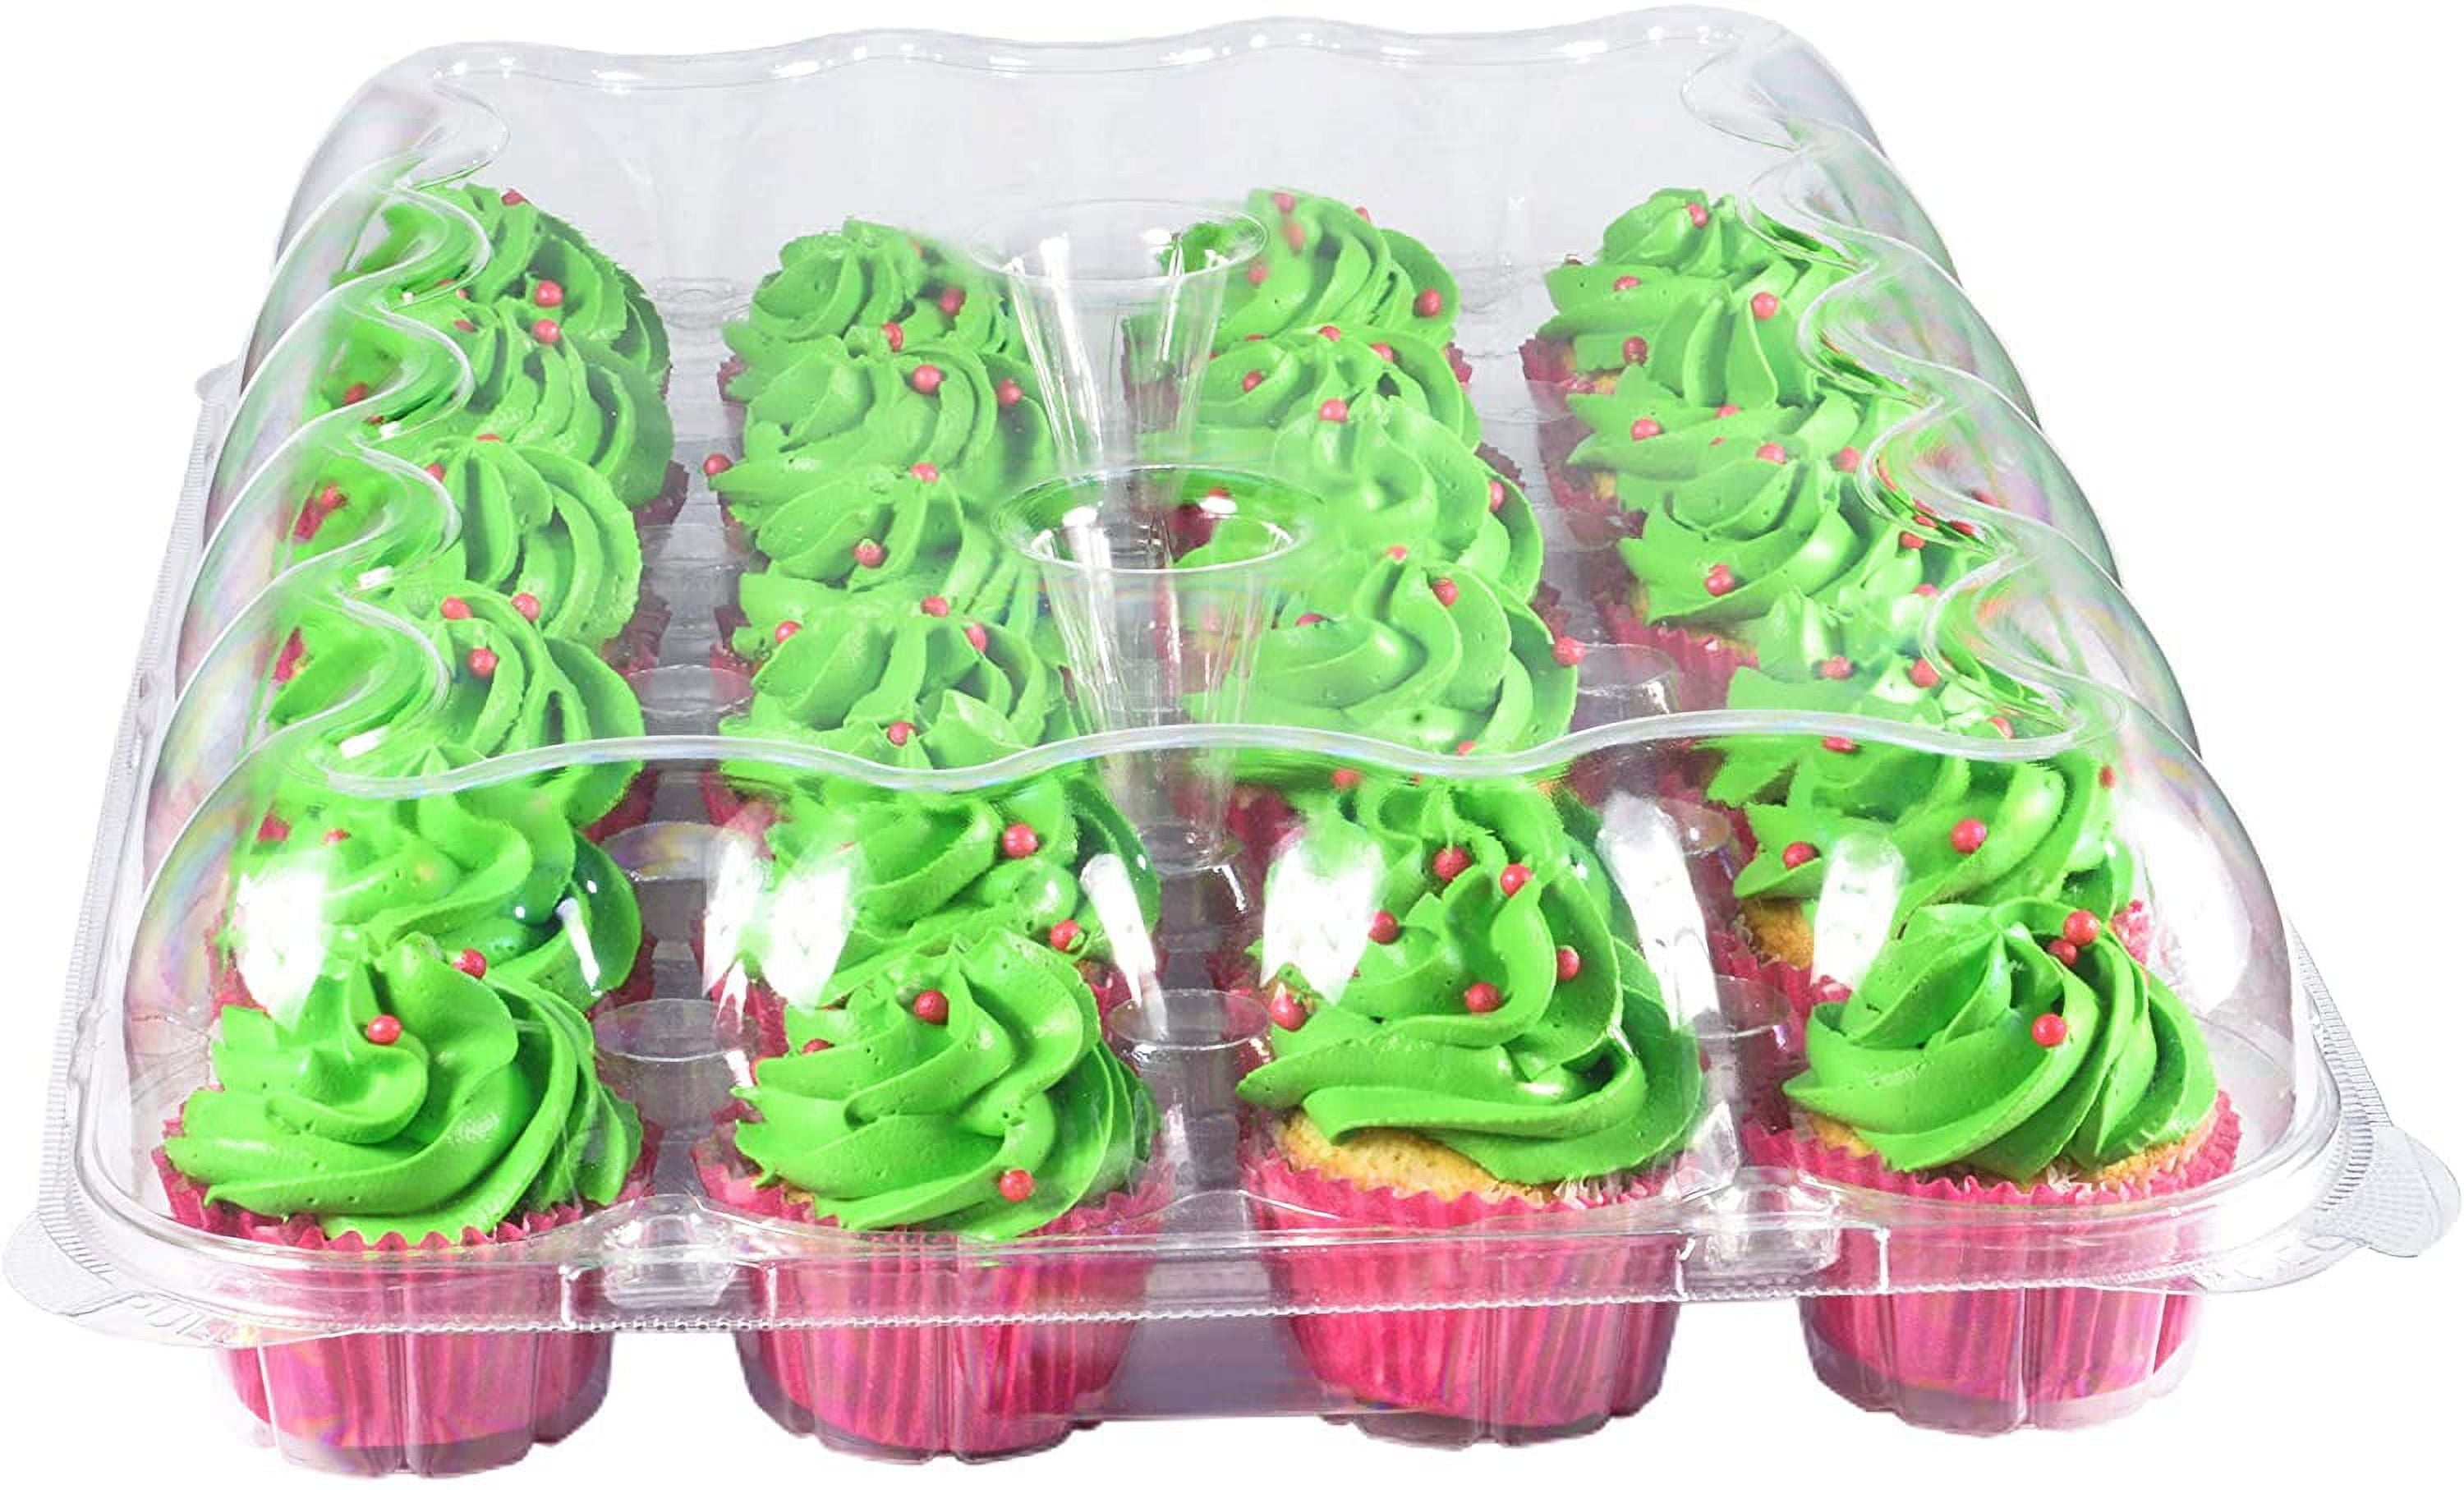 Pactiv RPET Clear 6 Count Cupcake Container with High Dome Lid, 64 Ounce Capacity -- 125 per Case